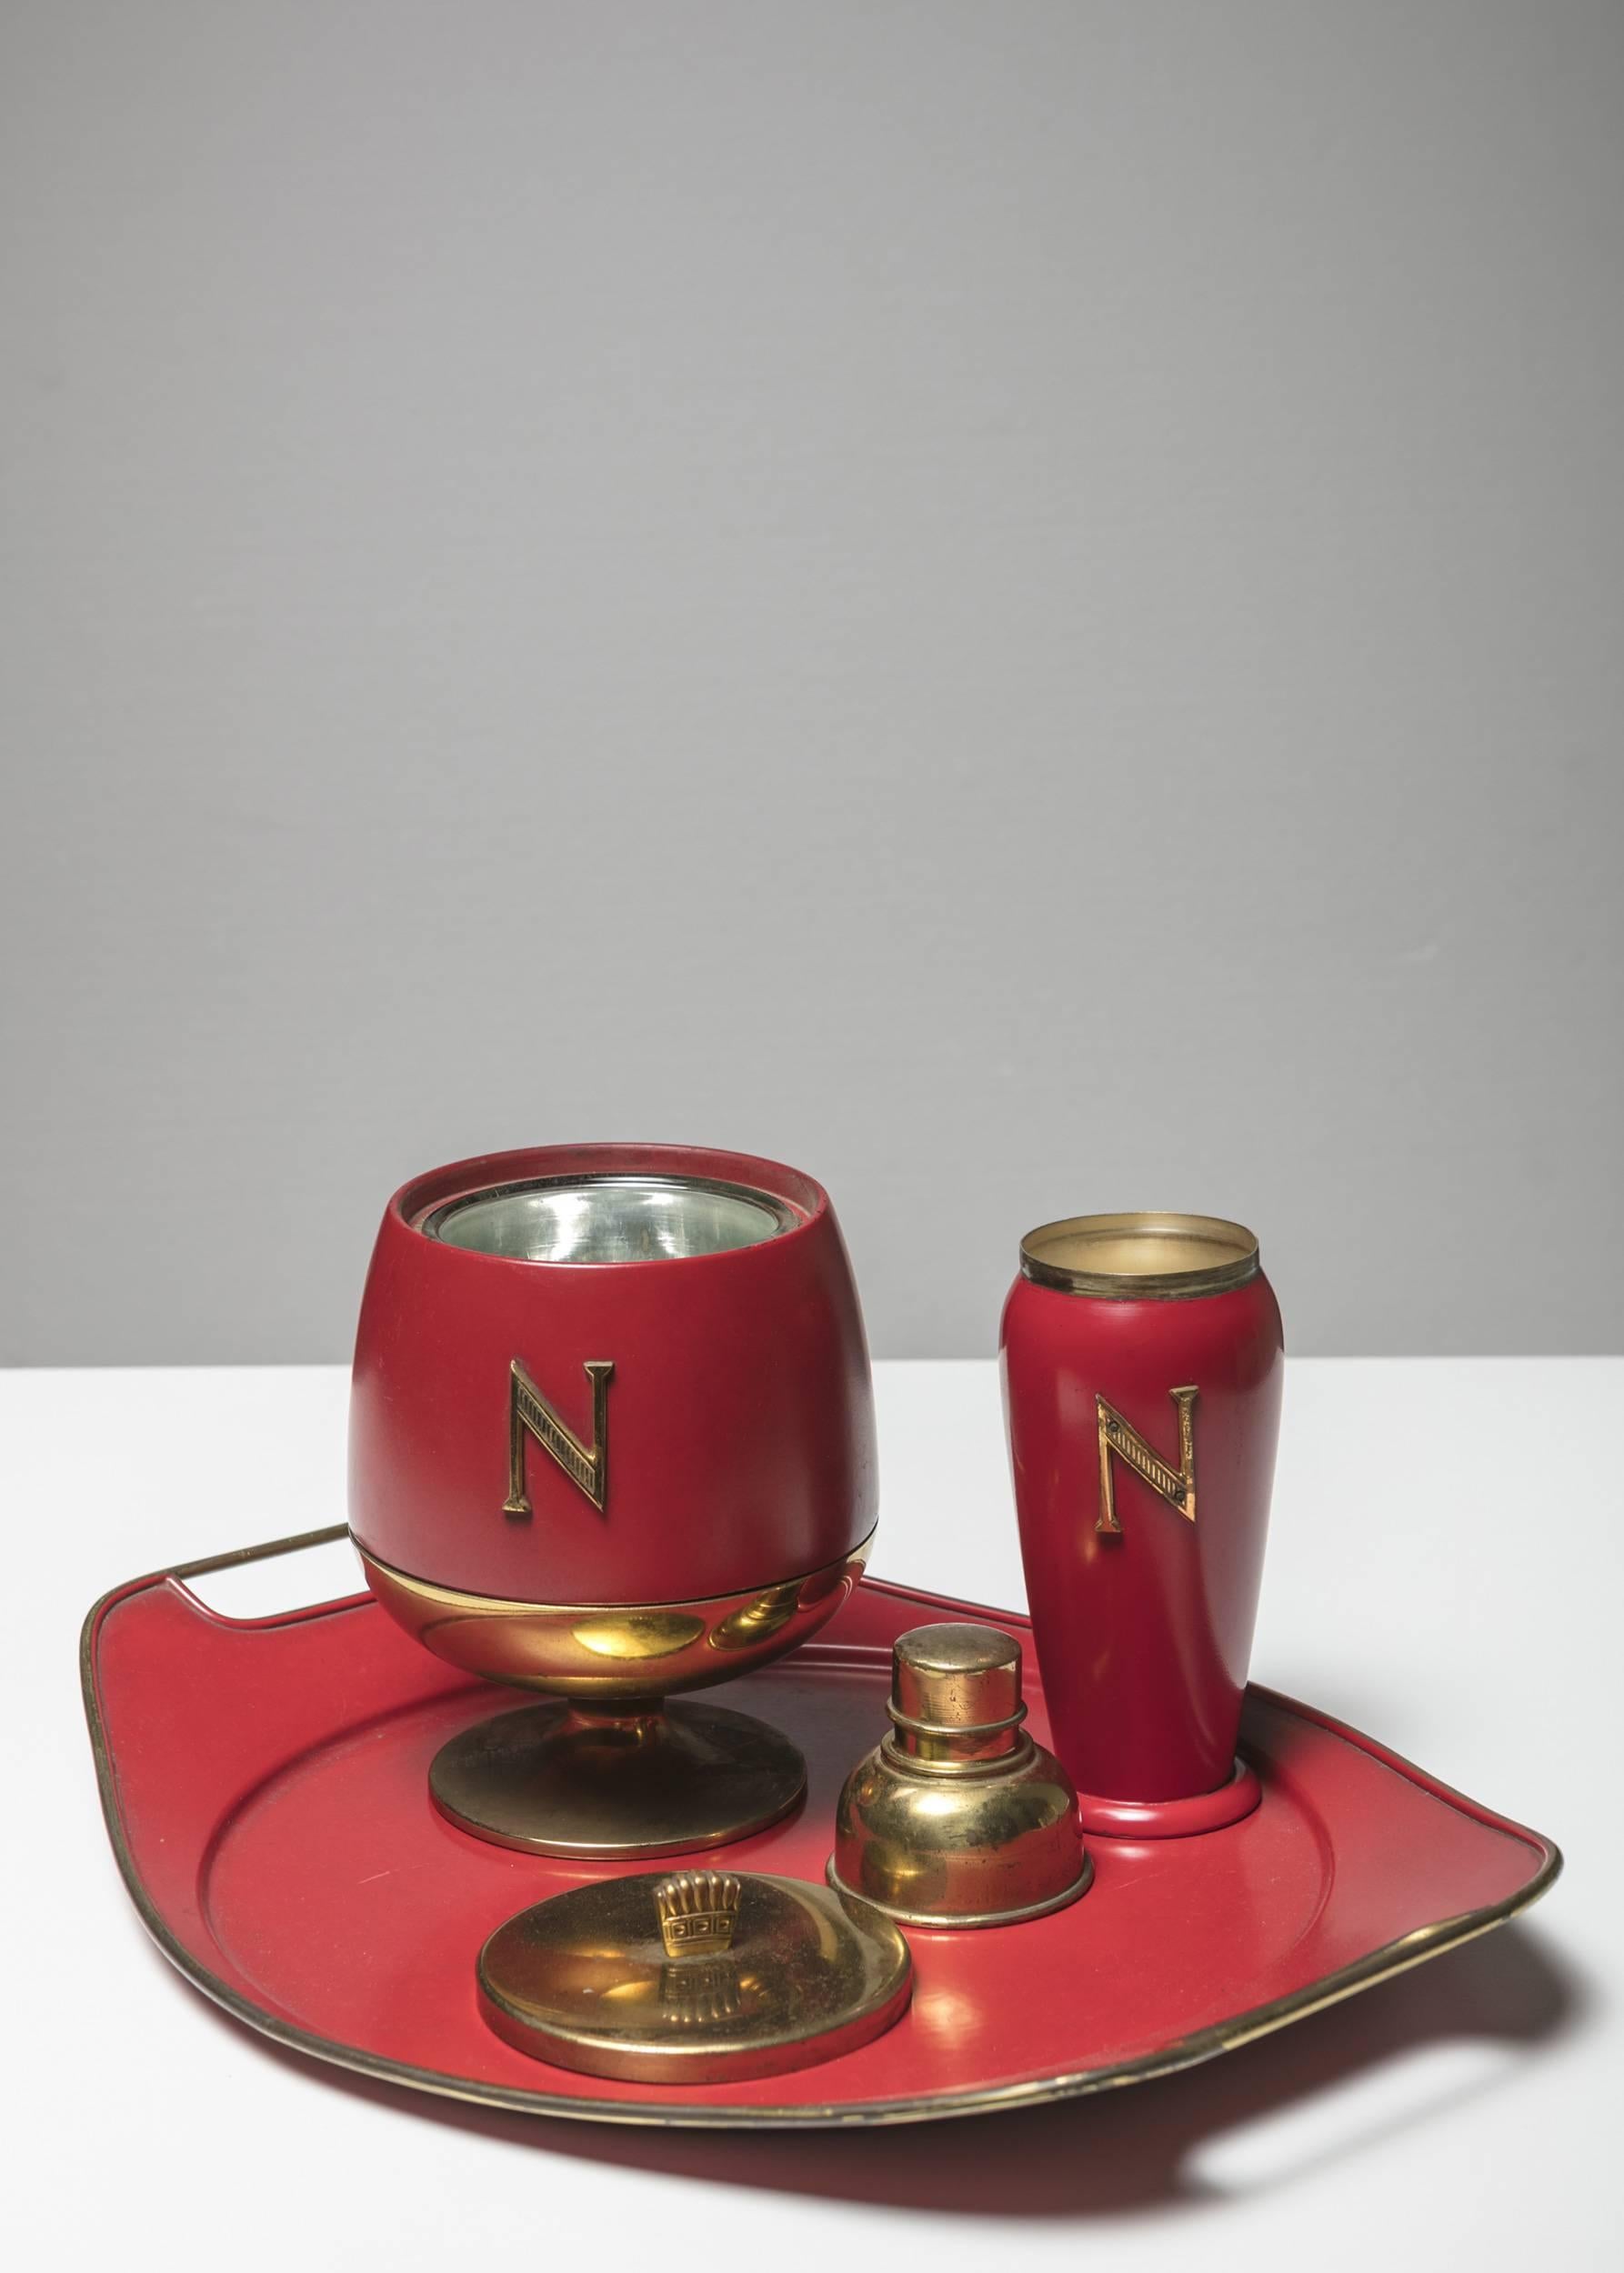 Remarkable bar set by Aldo Tura for Macabo.
N brass letter on ice bucket and shaker on a red background.
Size refers to the tray piece.